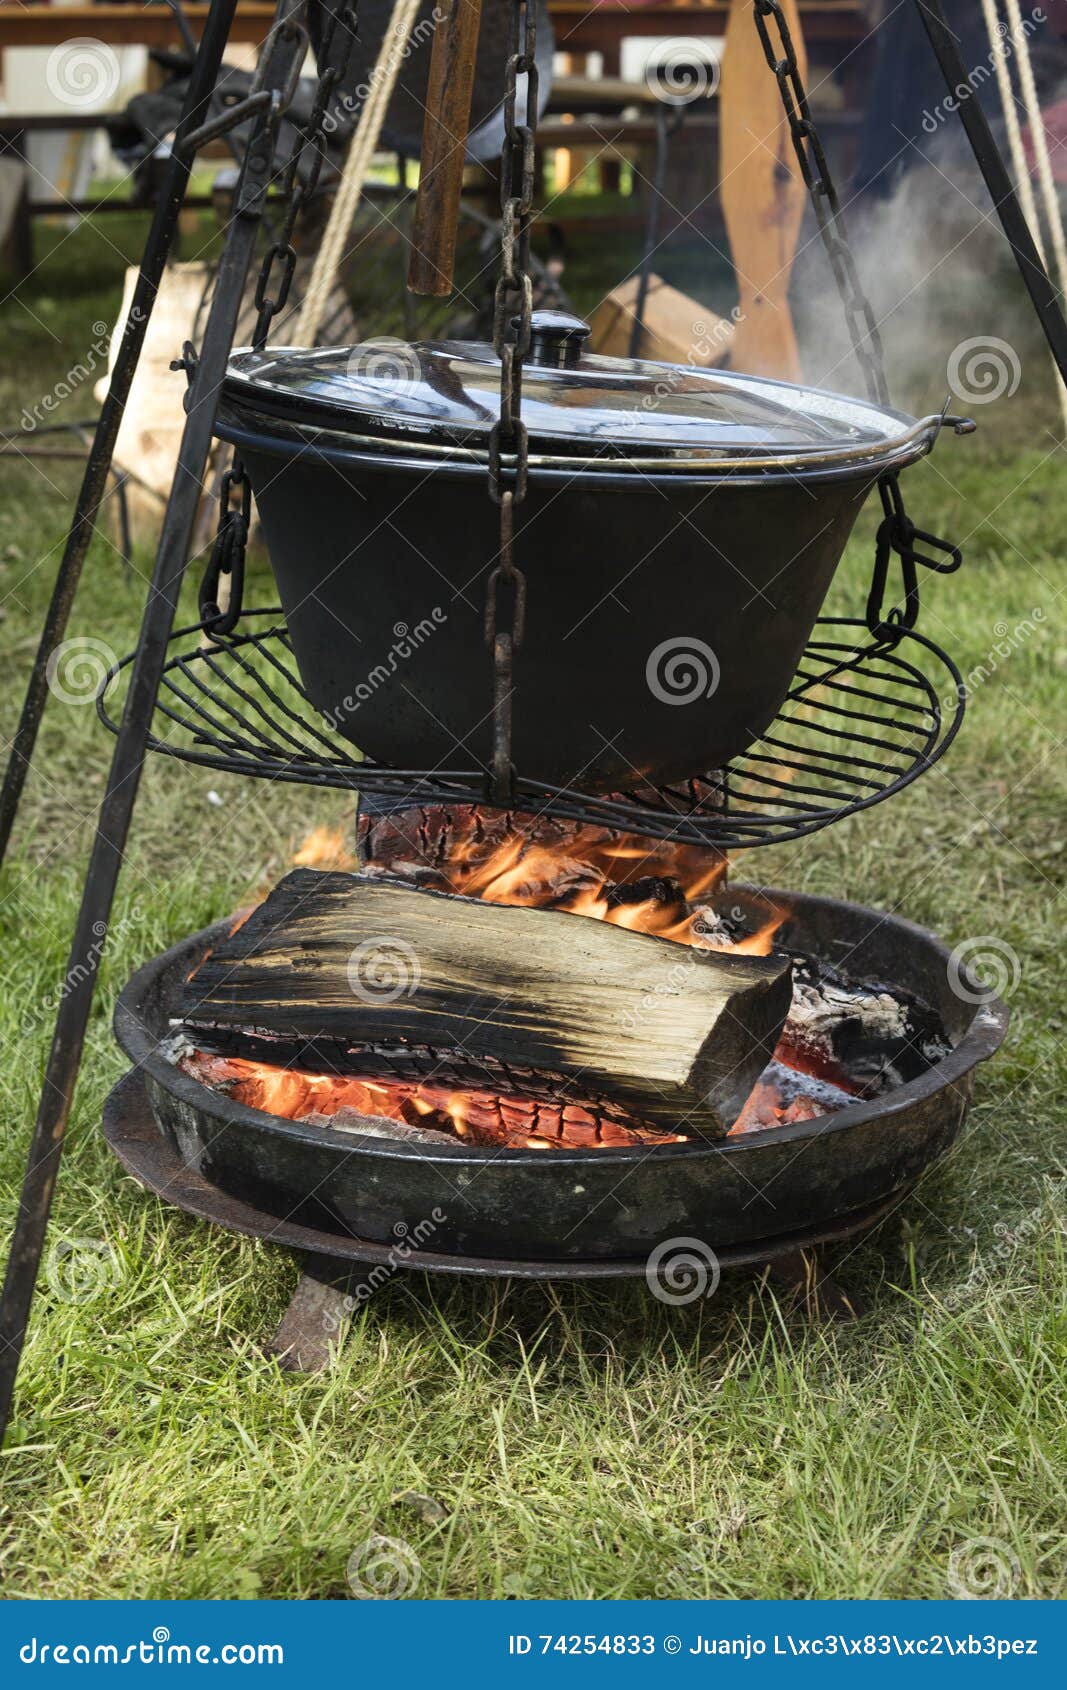 Big Cooking Pot Placed on Fire in a Camping Outdoors Stock Image